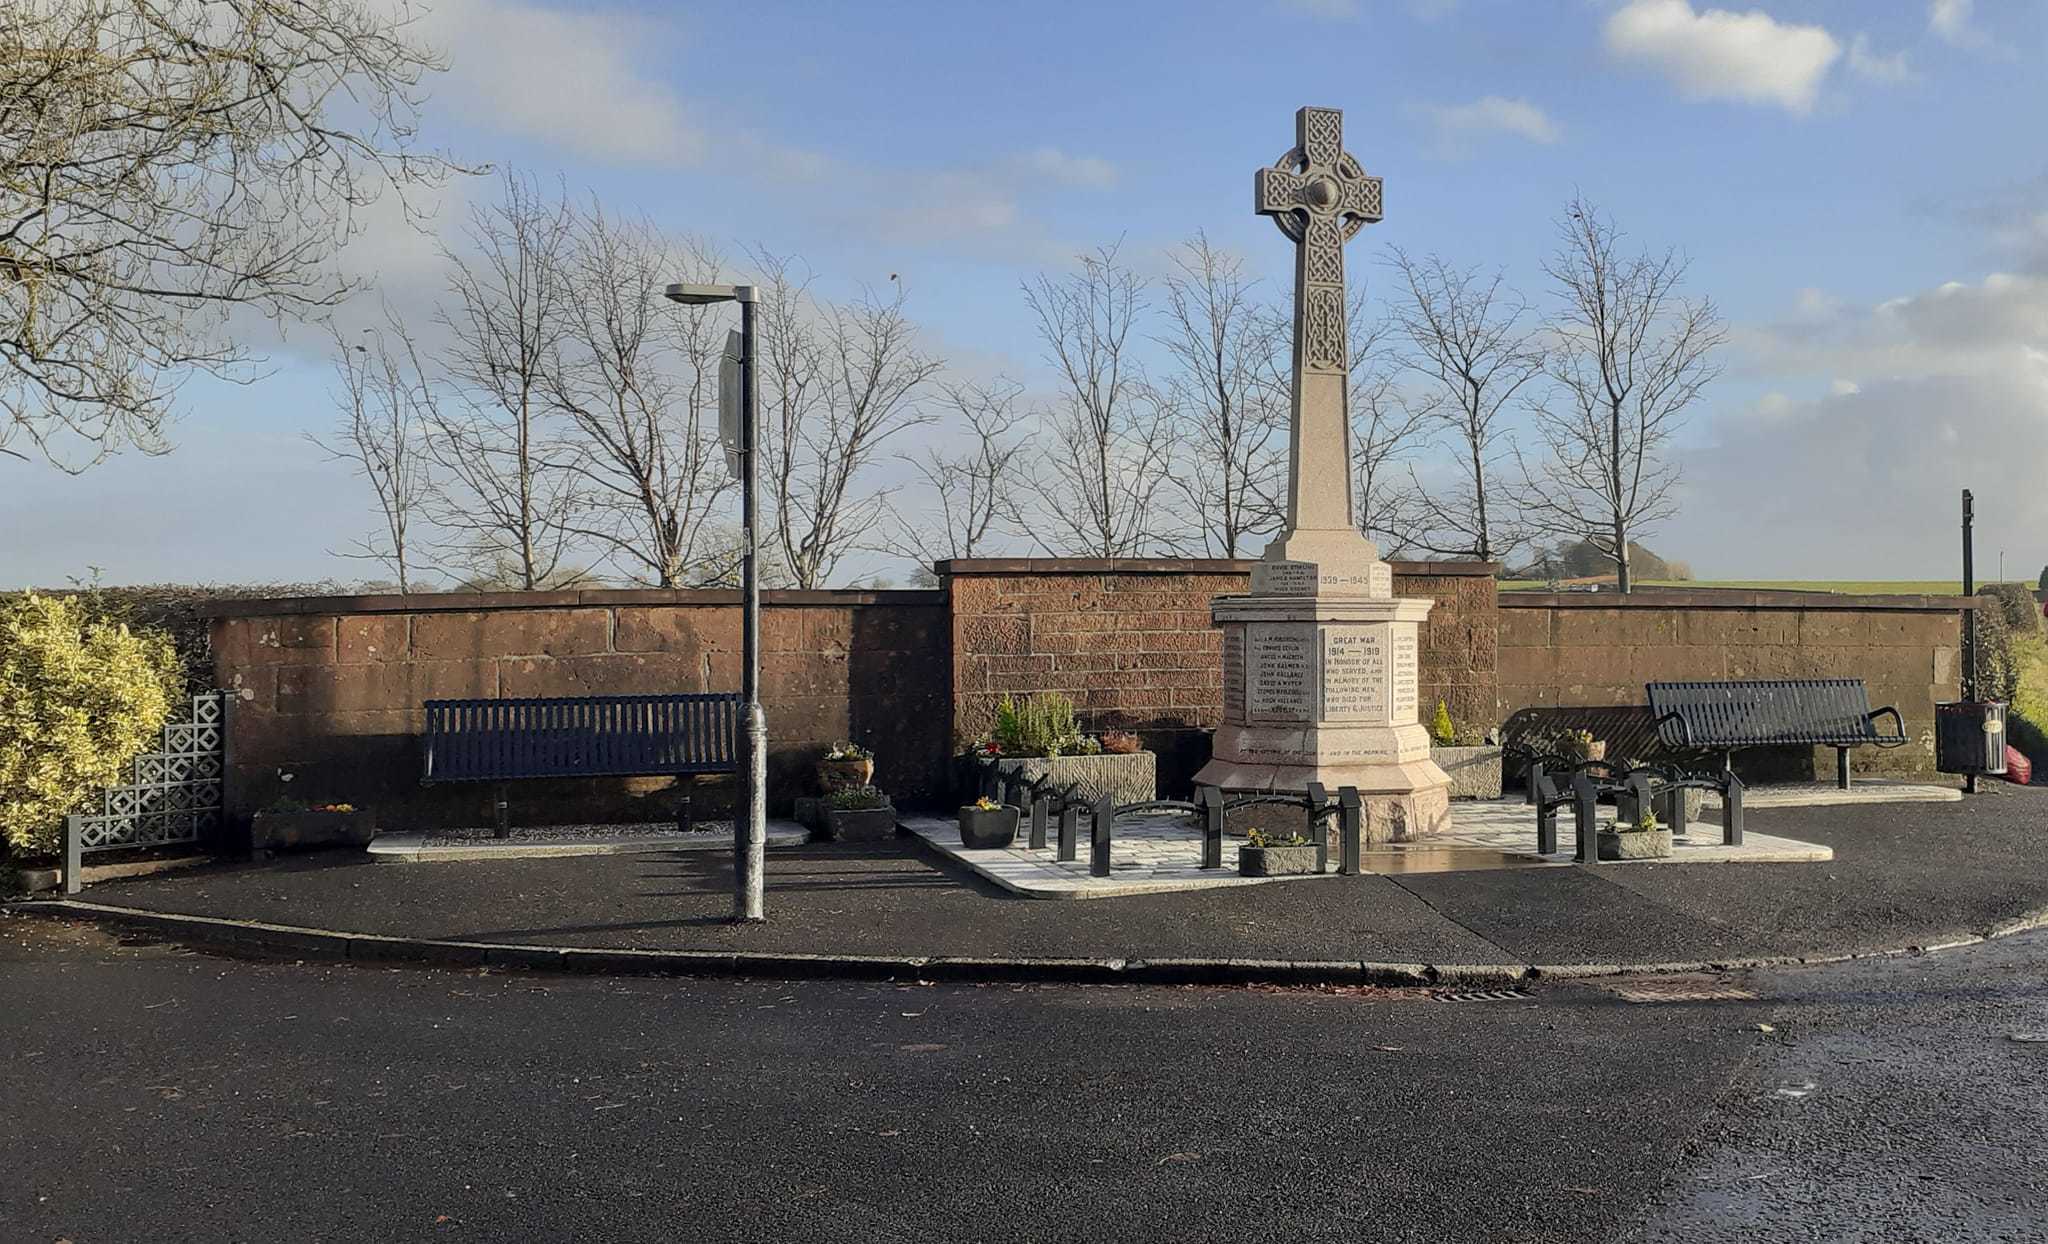 The Tarbolton war memorial looking at its best after volunteers carried out improvements along with South Ayrshire Councils Locality Hit Squad ahead of Remembrance Sunday